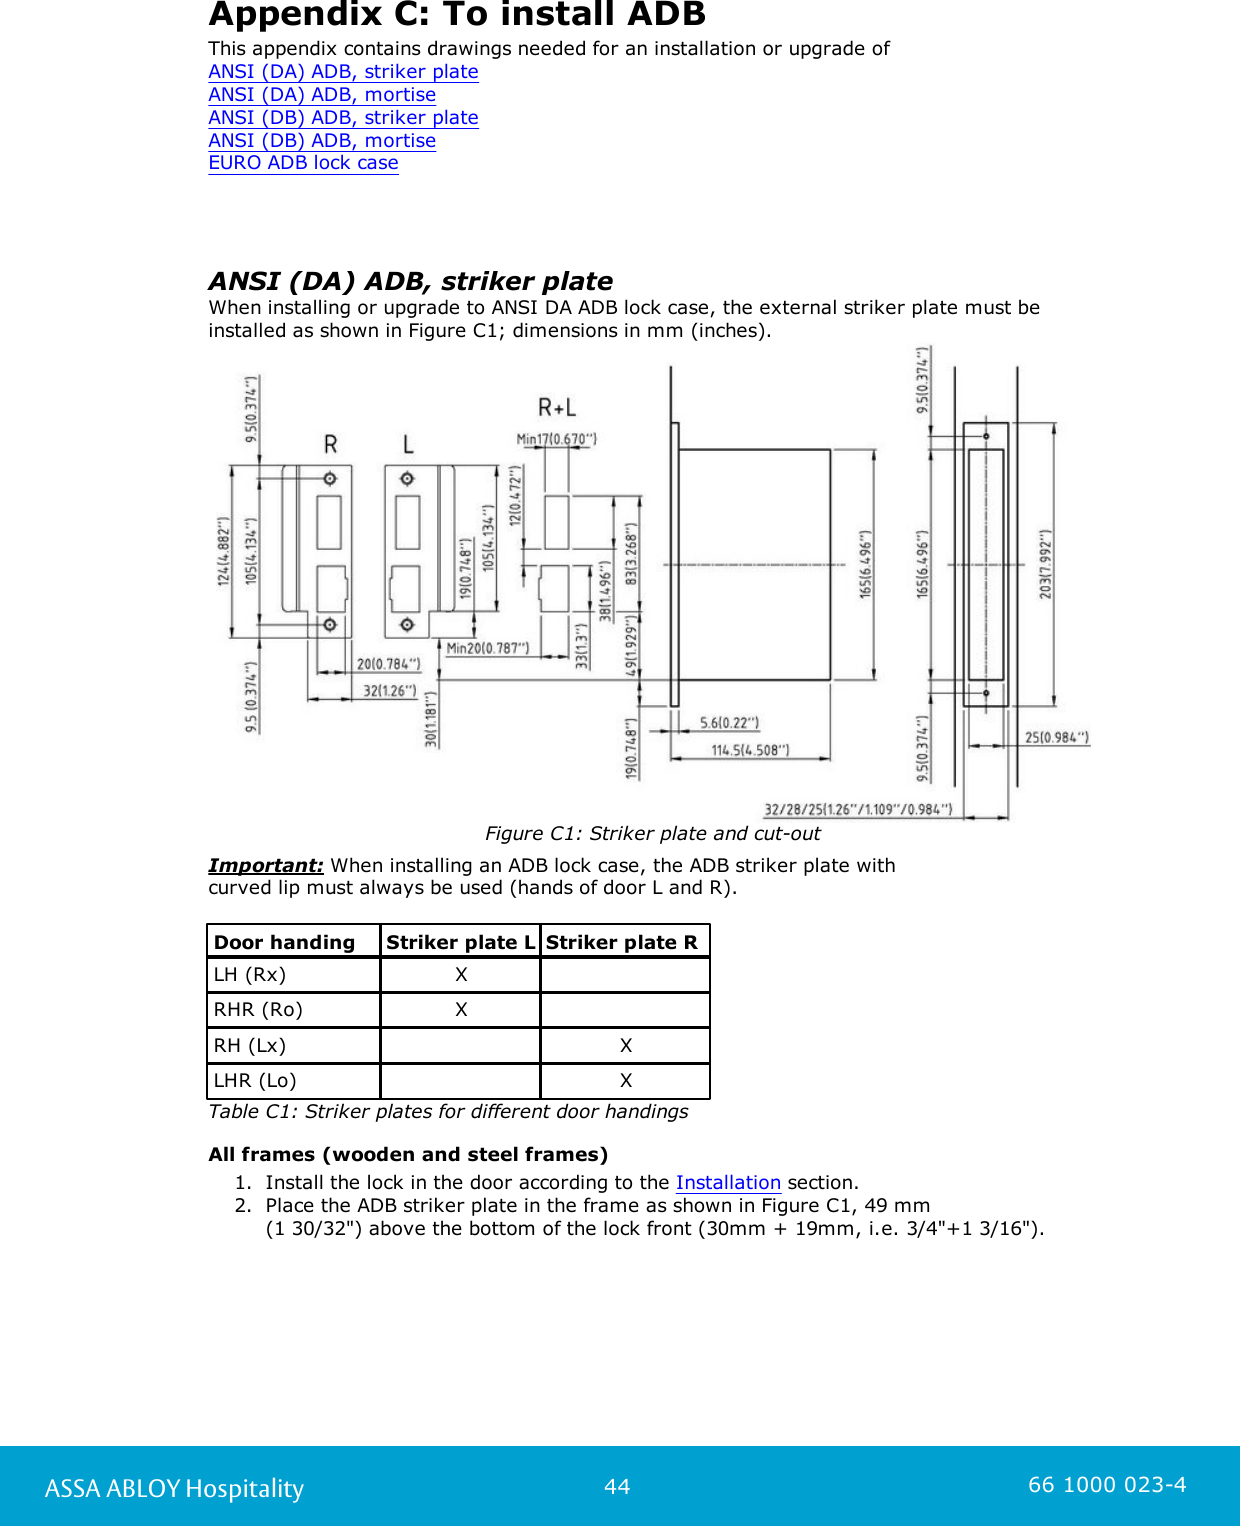 44ASSA ABLOY Hospitality 66 1000 023-4Appendix C: To install ADB This appendix contains drawings needed for an installation or upgrade of ANSI (DA) ADB, striker plateANSI (DA) ADB, mortiseANSI (DB) ADB, striker plateANSI (DB) ADB, mortiseEURO ADB lock case ANSI (DA) ADB, striker plateWhen installing or upgrade to ANSI DA ADB lock case, the external striker plate must beinstalled as shown in Figure C1; dimensions in mm (inches). Figure C1: Striker plate and cut-out   Important: When installing an ADB lock case, the ADB striker plate with curved lip must always be used (hands of door L and R).Door handingStriker plate LStriker plate RLH (Rx)XRHR (Ro)XRH (Lx)XLHR (Lo)XTable C1: Striker plates for different door handings  All frames (wooden and steel frames)1. Install the lock in the door according to the Installation section.2. Place the ADB striker plate in the frame as shown in Figure C1, 49 mm (1 30/32&quot;) above the bottom of the lock front (30mm + 19mm, i.e. 3/4&quot;+1 3/16&quot;).